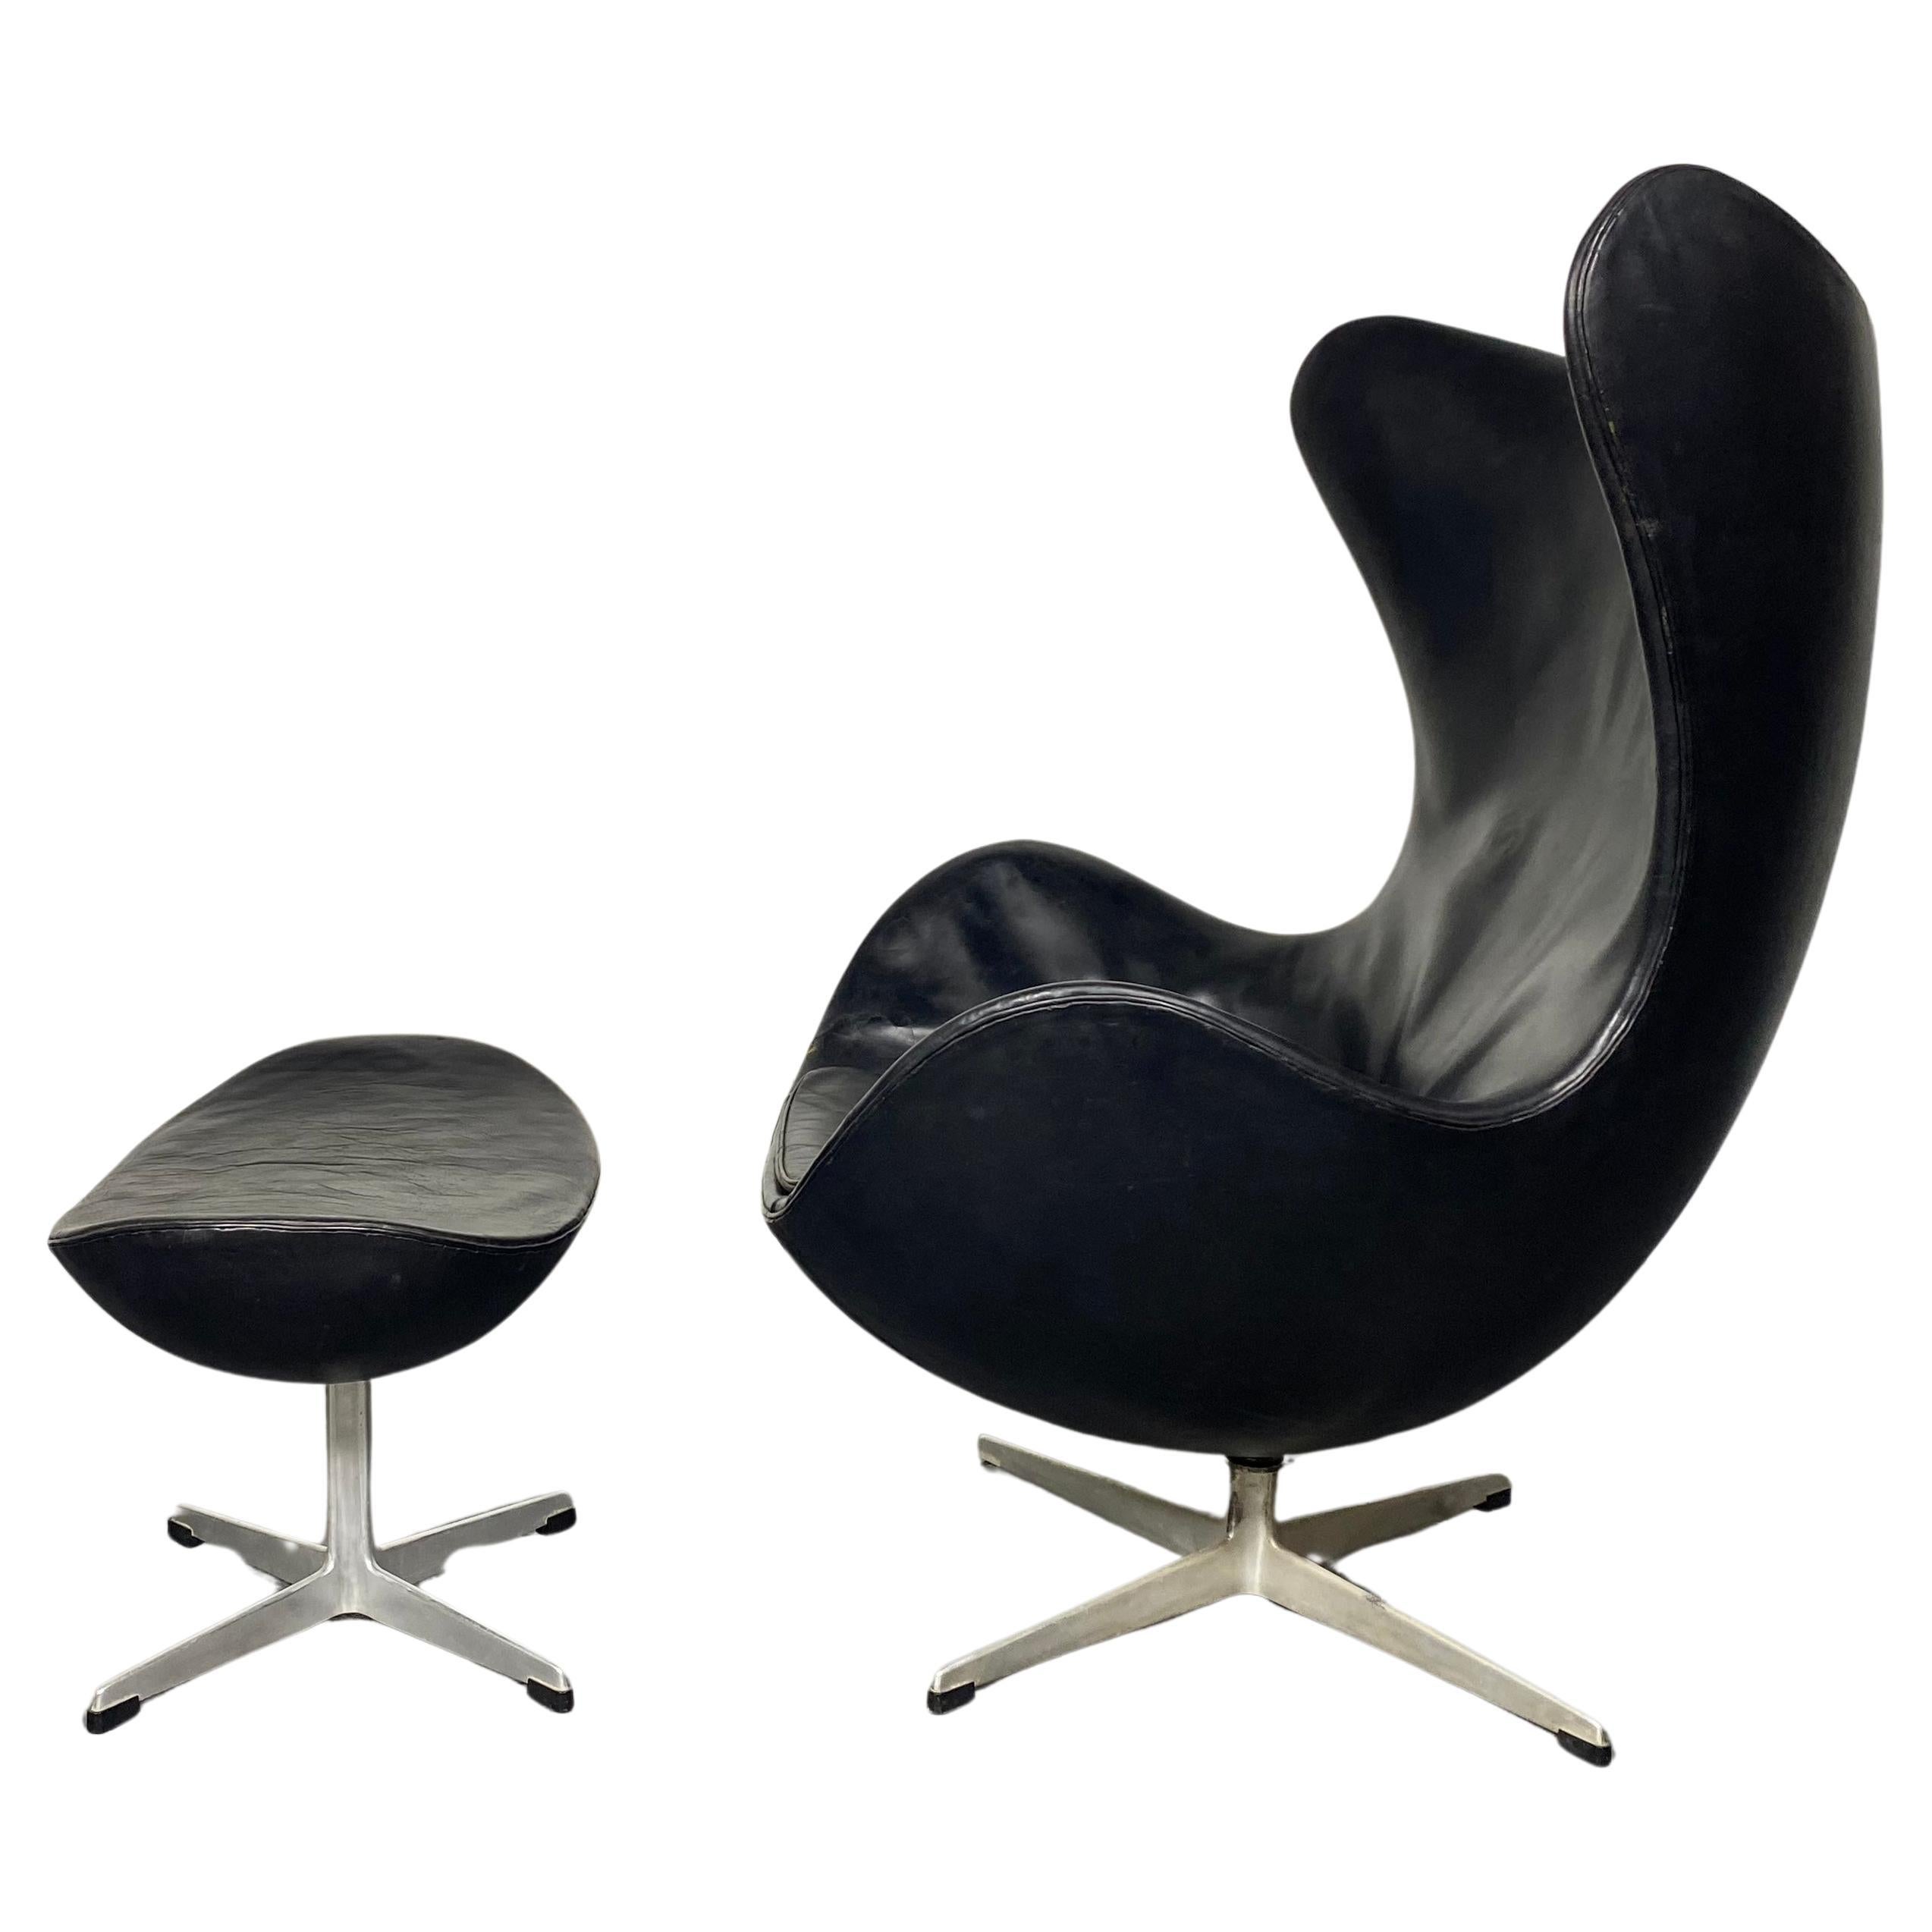 Early Egg Chair&Ottoman by Arne Jacobsen / Fritz Hansen, 1959 White Ink Stamp For Sale